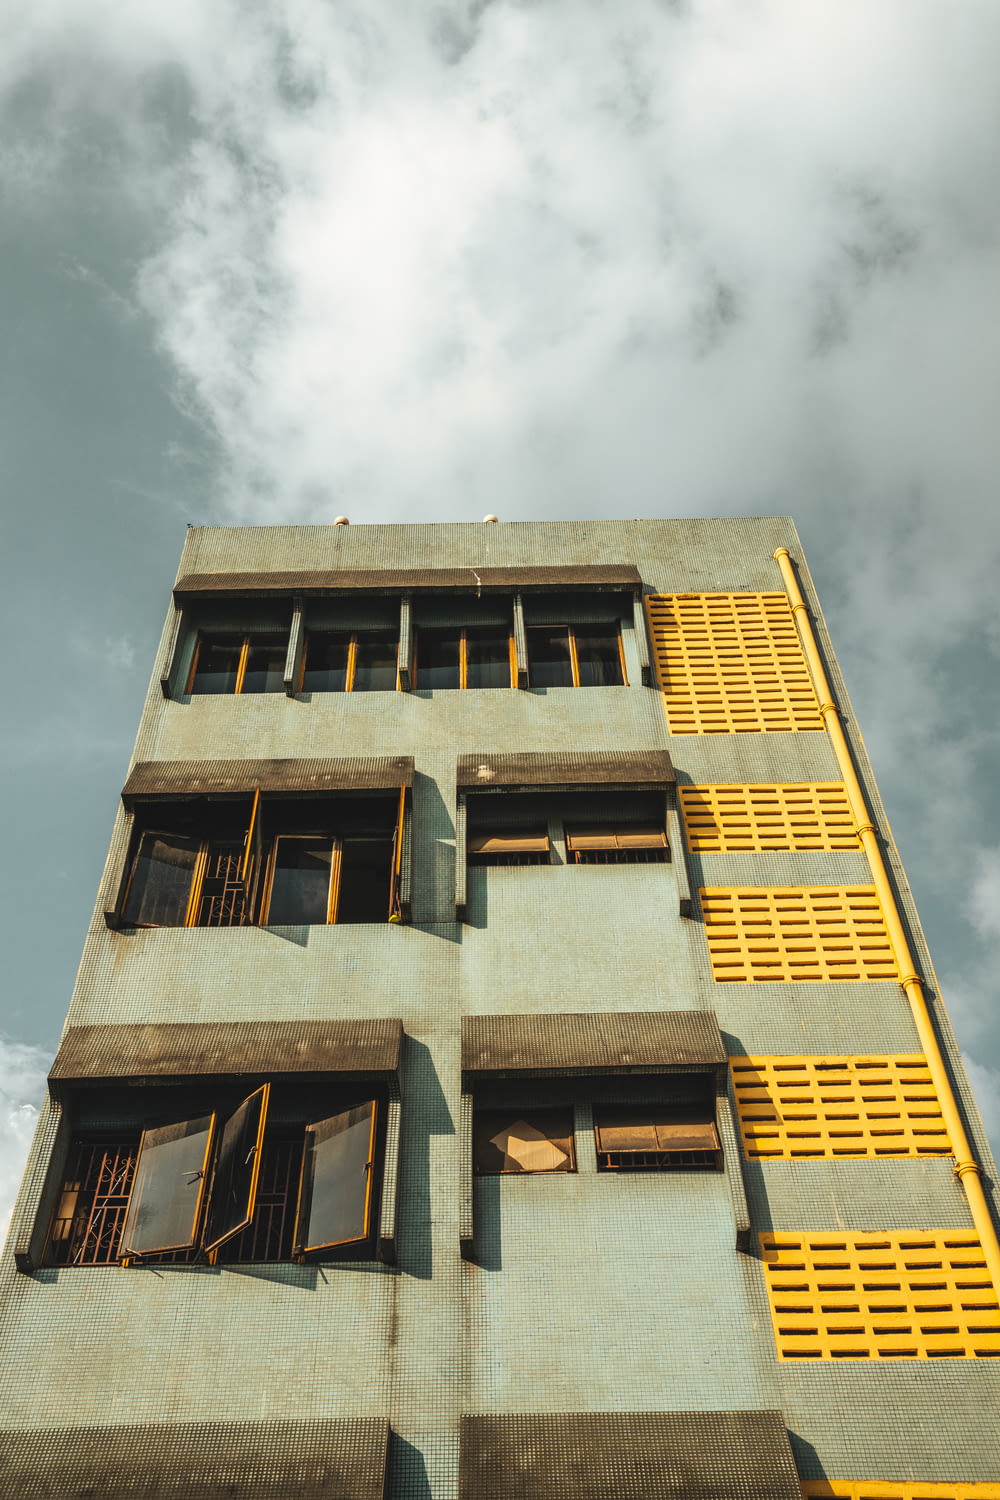 a tall building with yellow balconies and windows